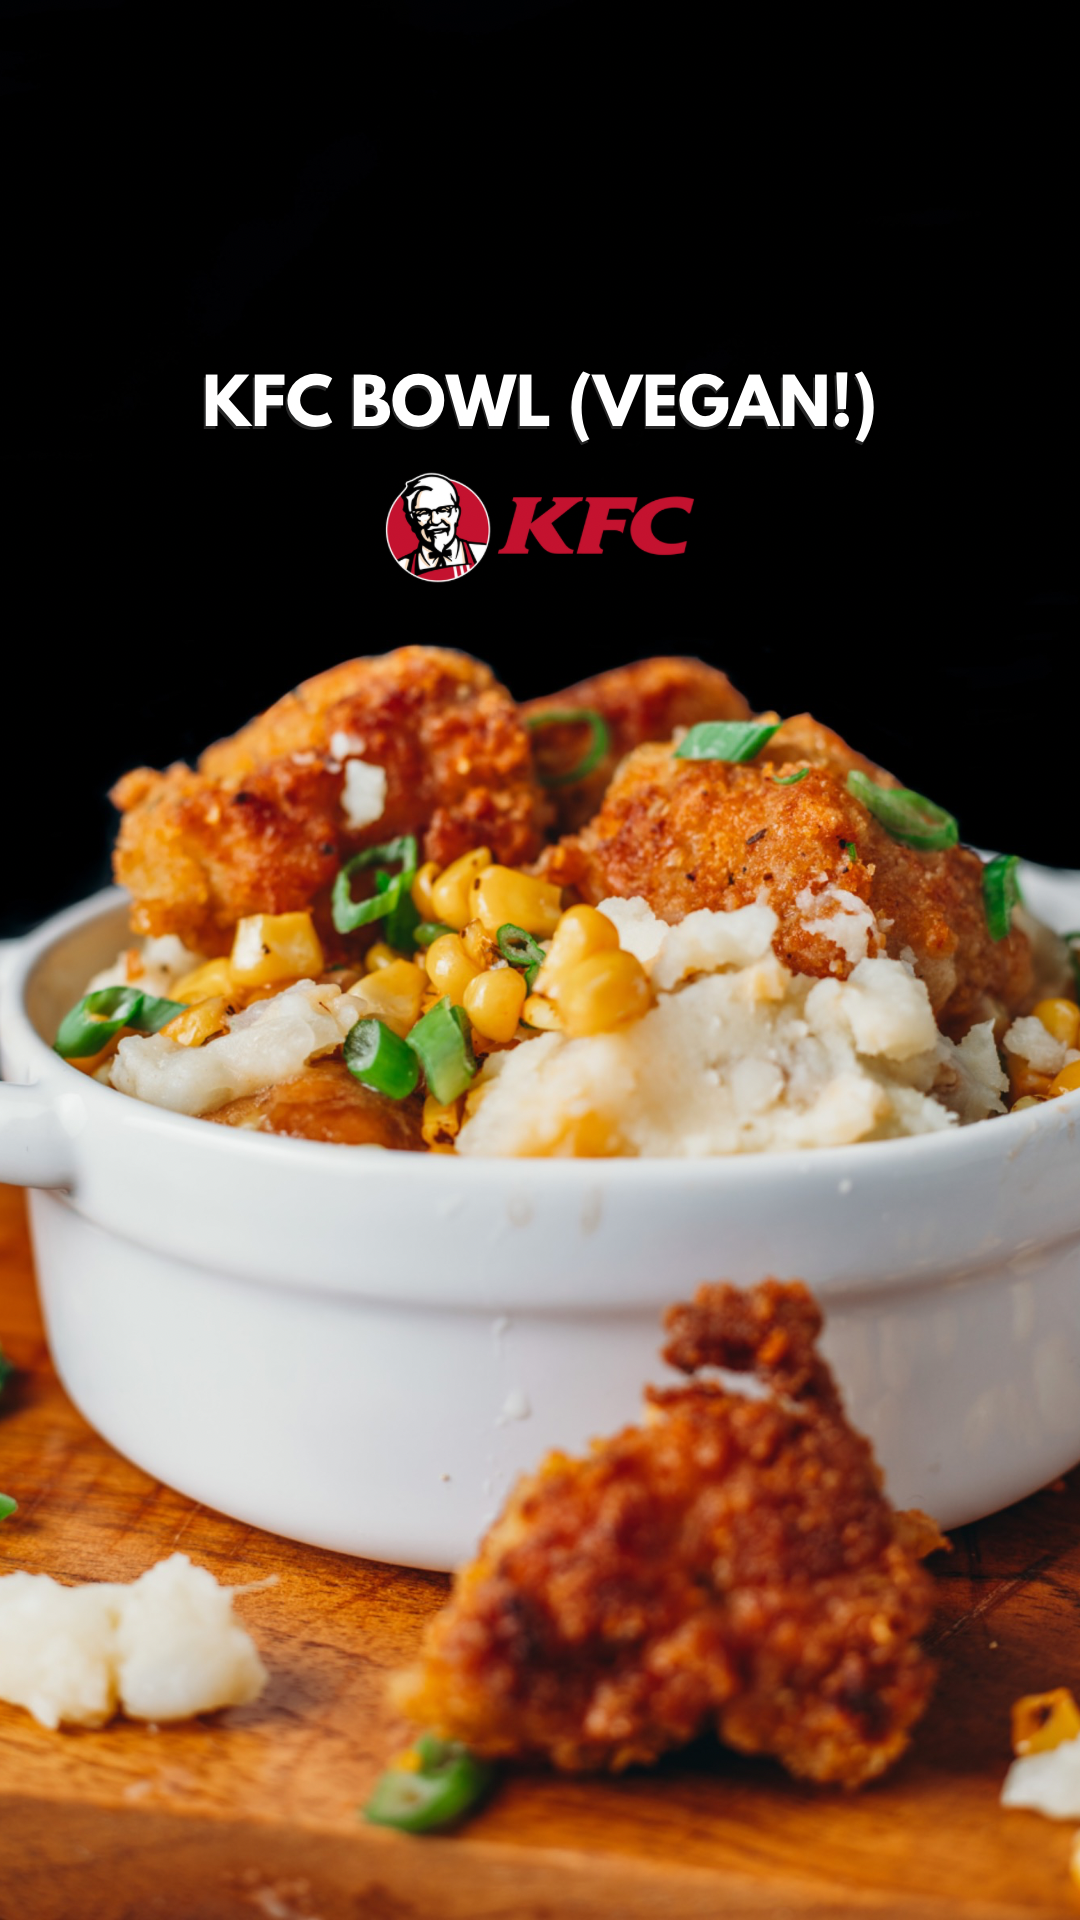 front on look of a pile of mashes potatoes, gravy, corn and vegan fried chicken bites in a white oven baking dish. "KFC Bowl (Vegan!)" and logo written over top.